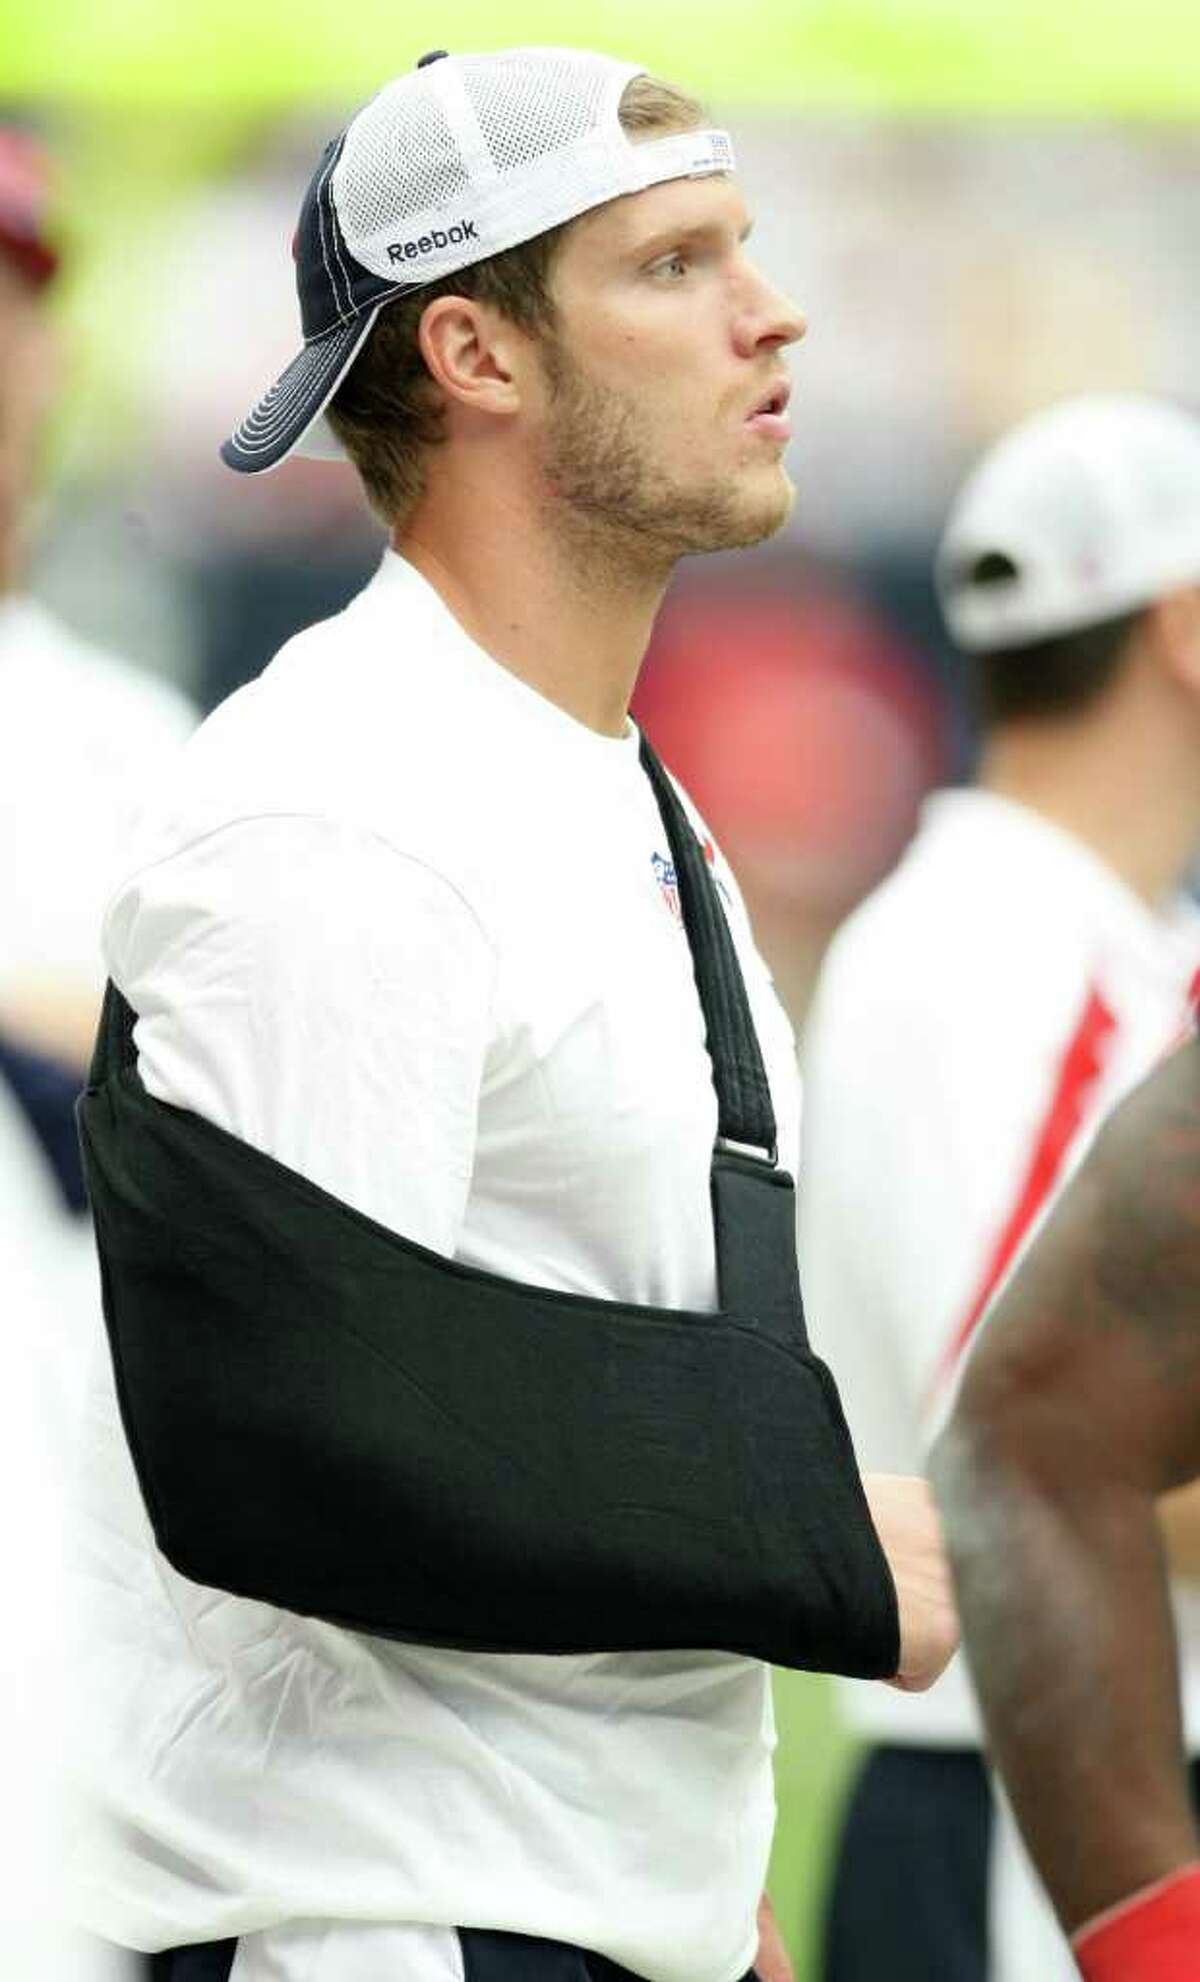 Houston Texans wide receiver Kevin Walter (83) watches the during game from the sidelines because of an injury during the fourth quarter of a NFL game, Sunday, Sept. 11, 2011, at Reliant Stadium in Houston.